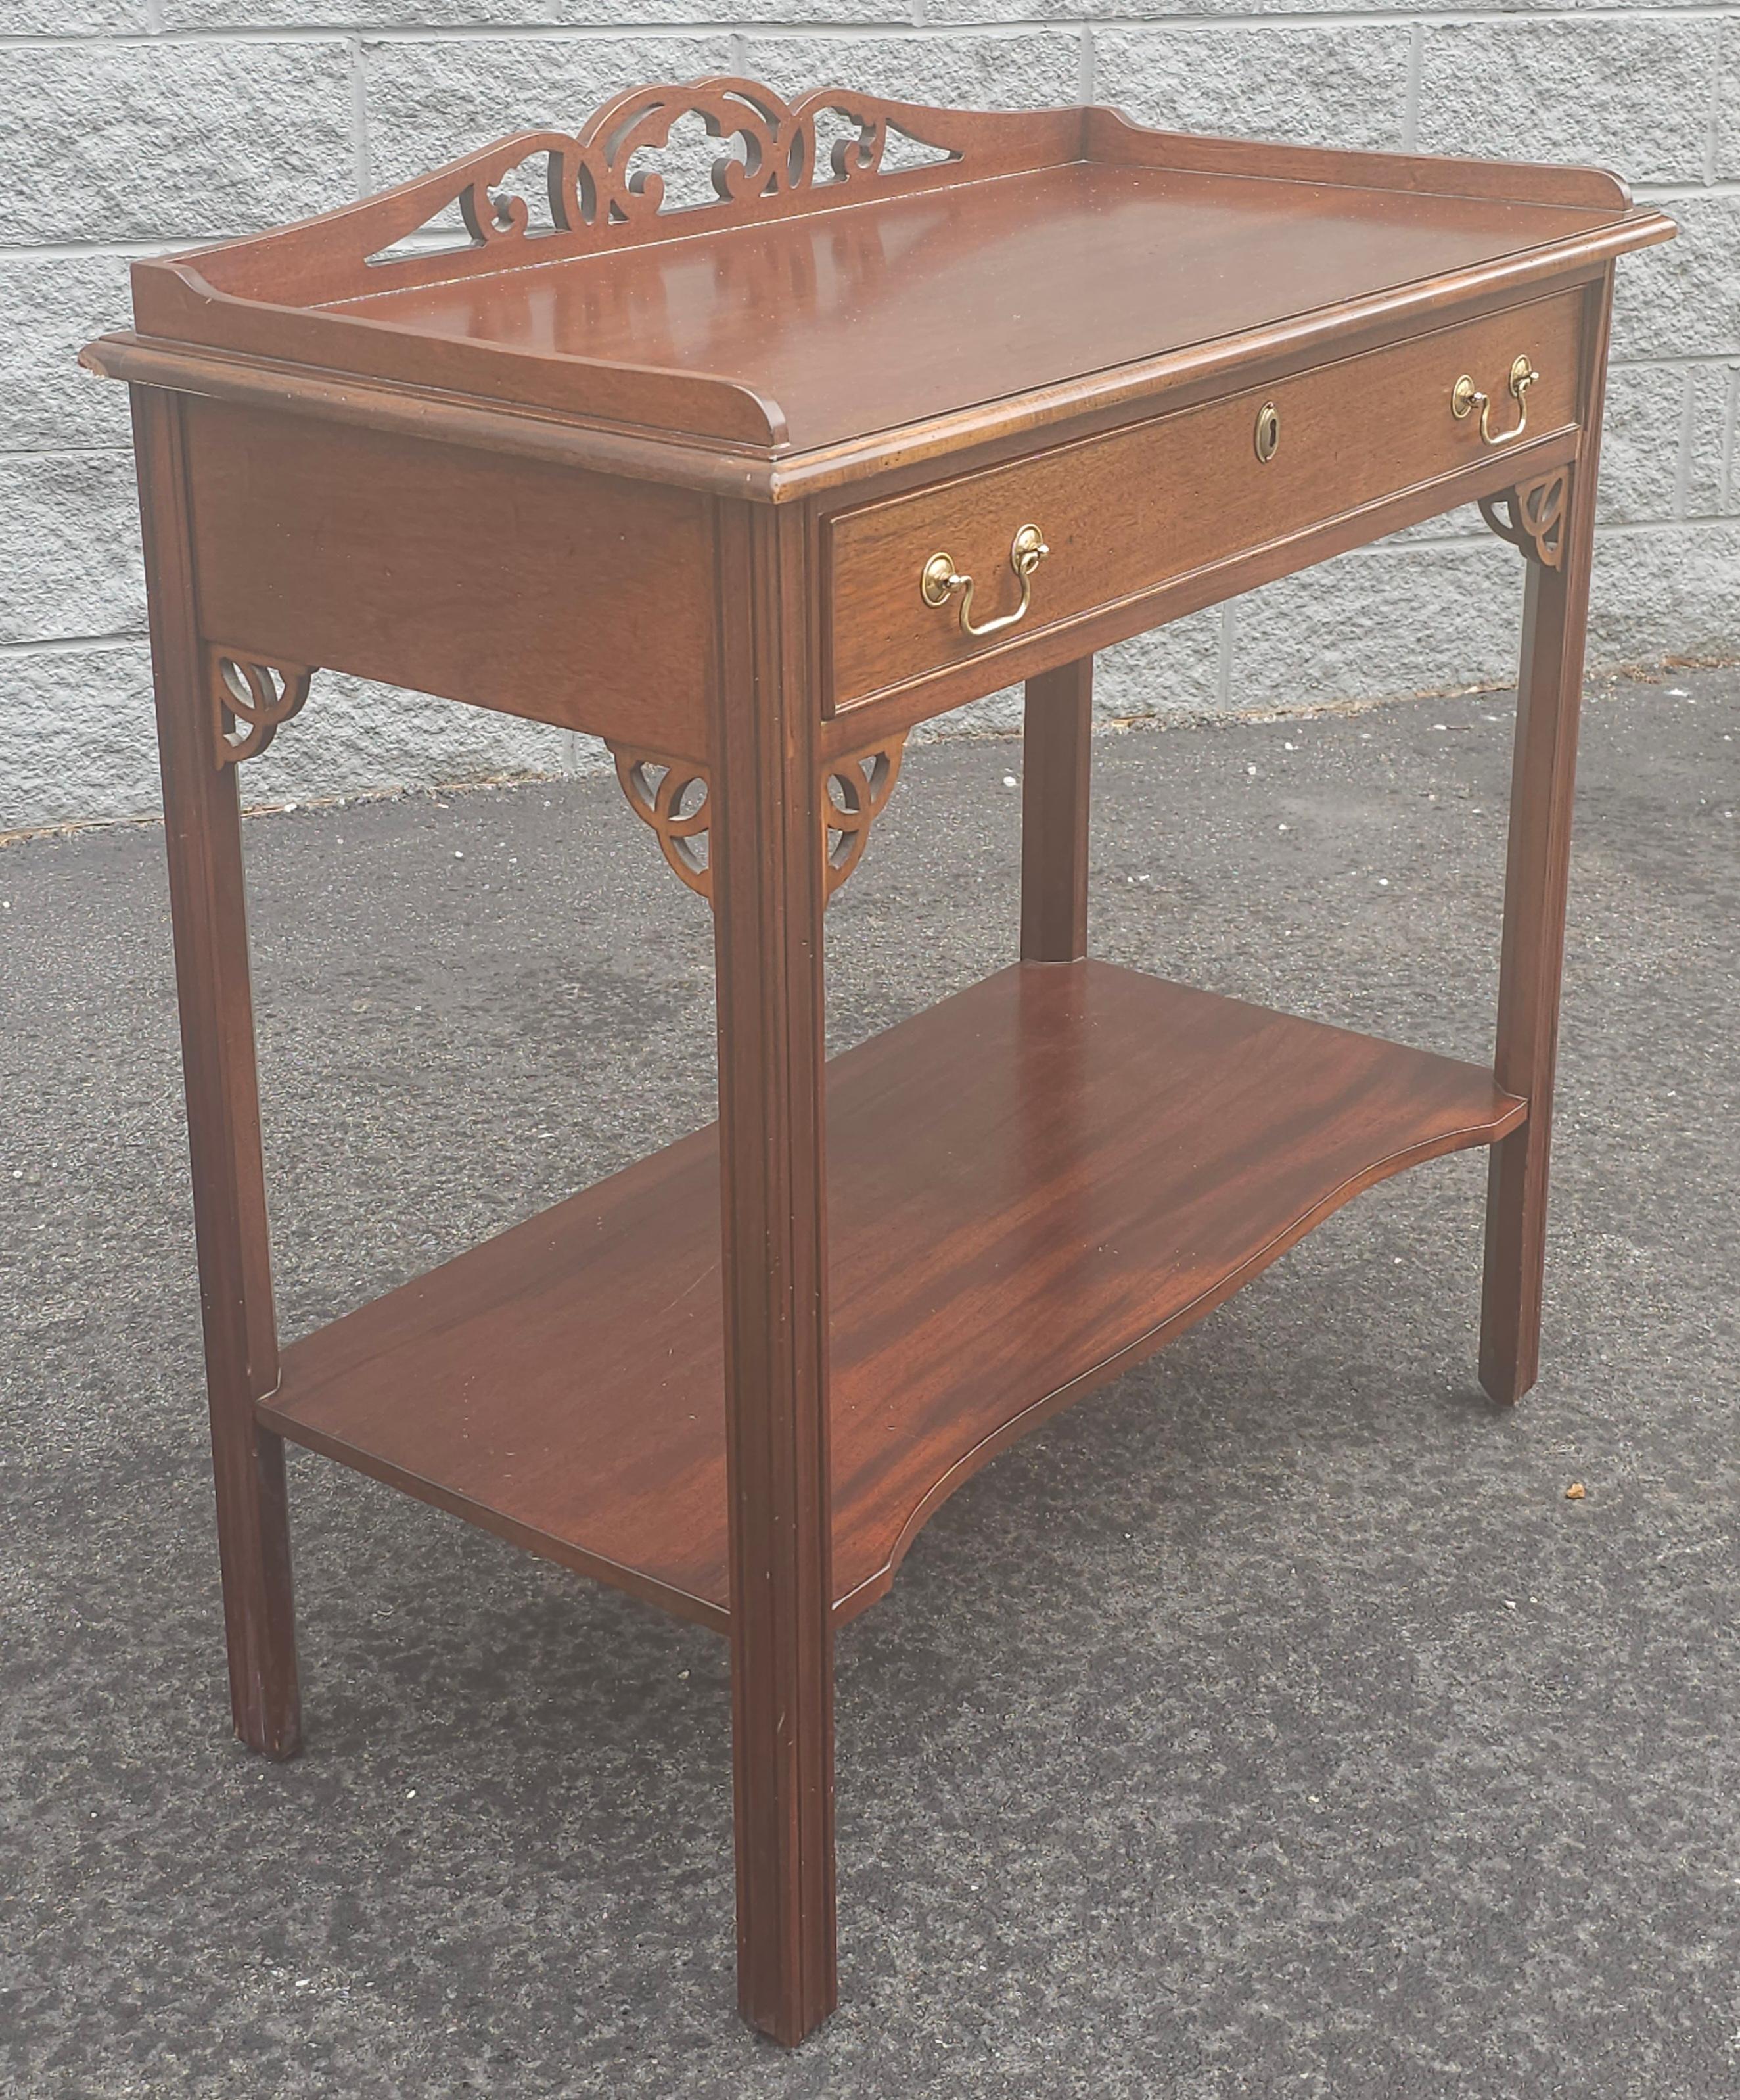 An Early 21st Century Chippendale Mahogany Buffet Server  or  Drybar. Measures 36